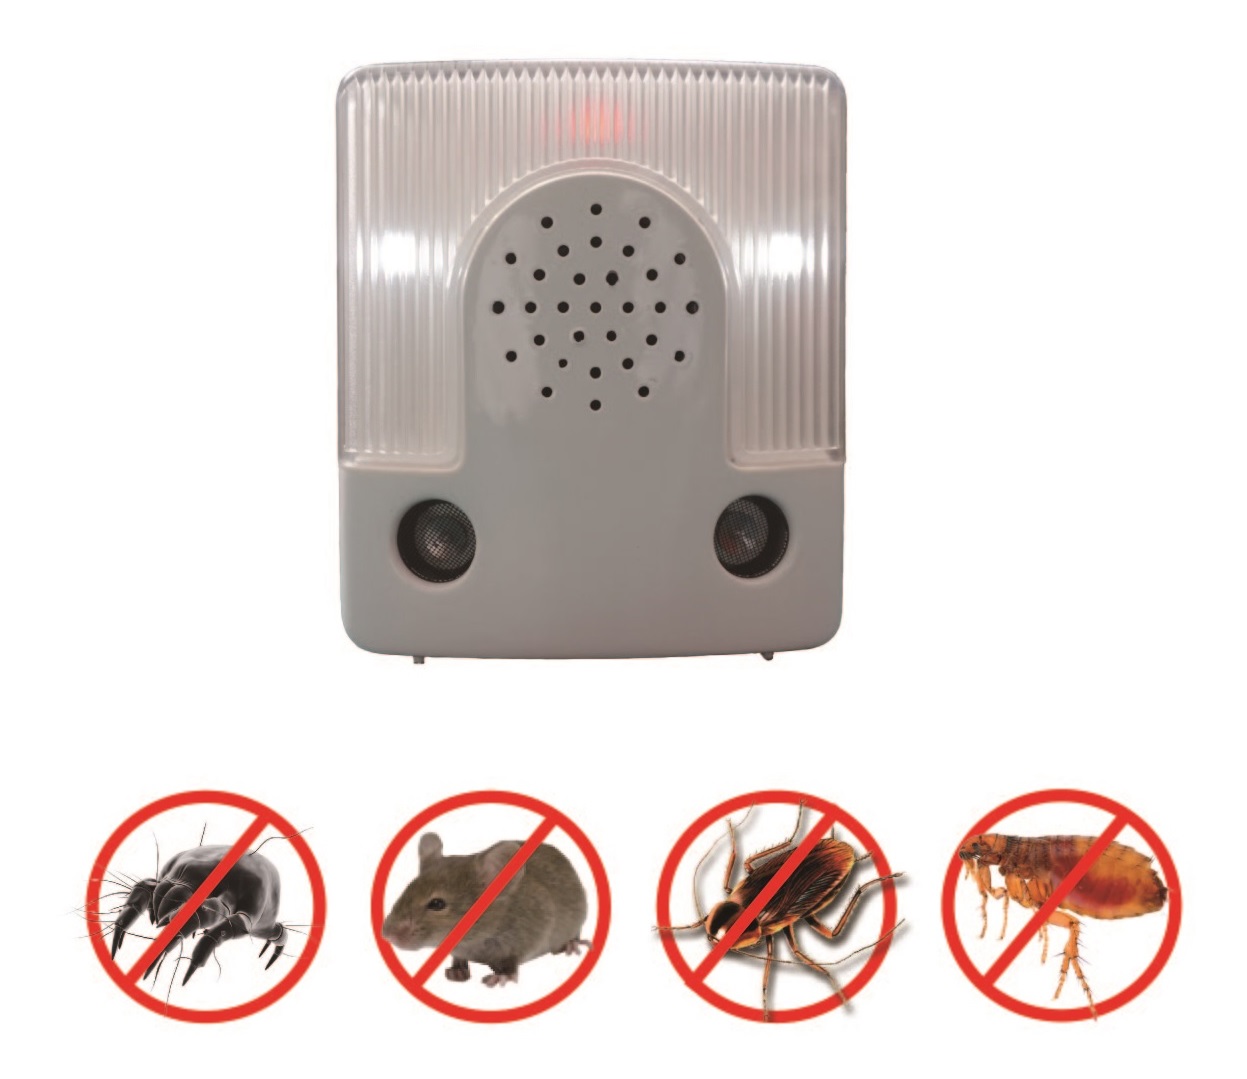 Ultrasonic Dust Mite/Mouse/Cockroach/Flea Repeller with LED Night Light